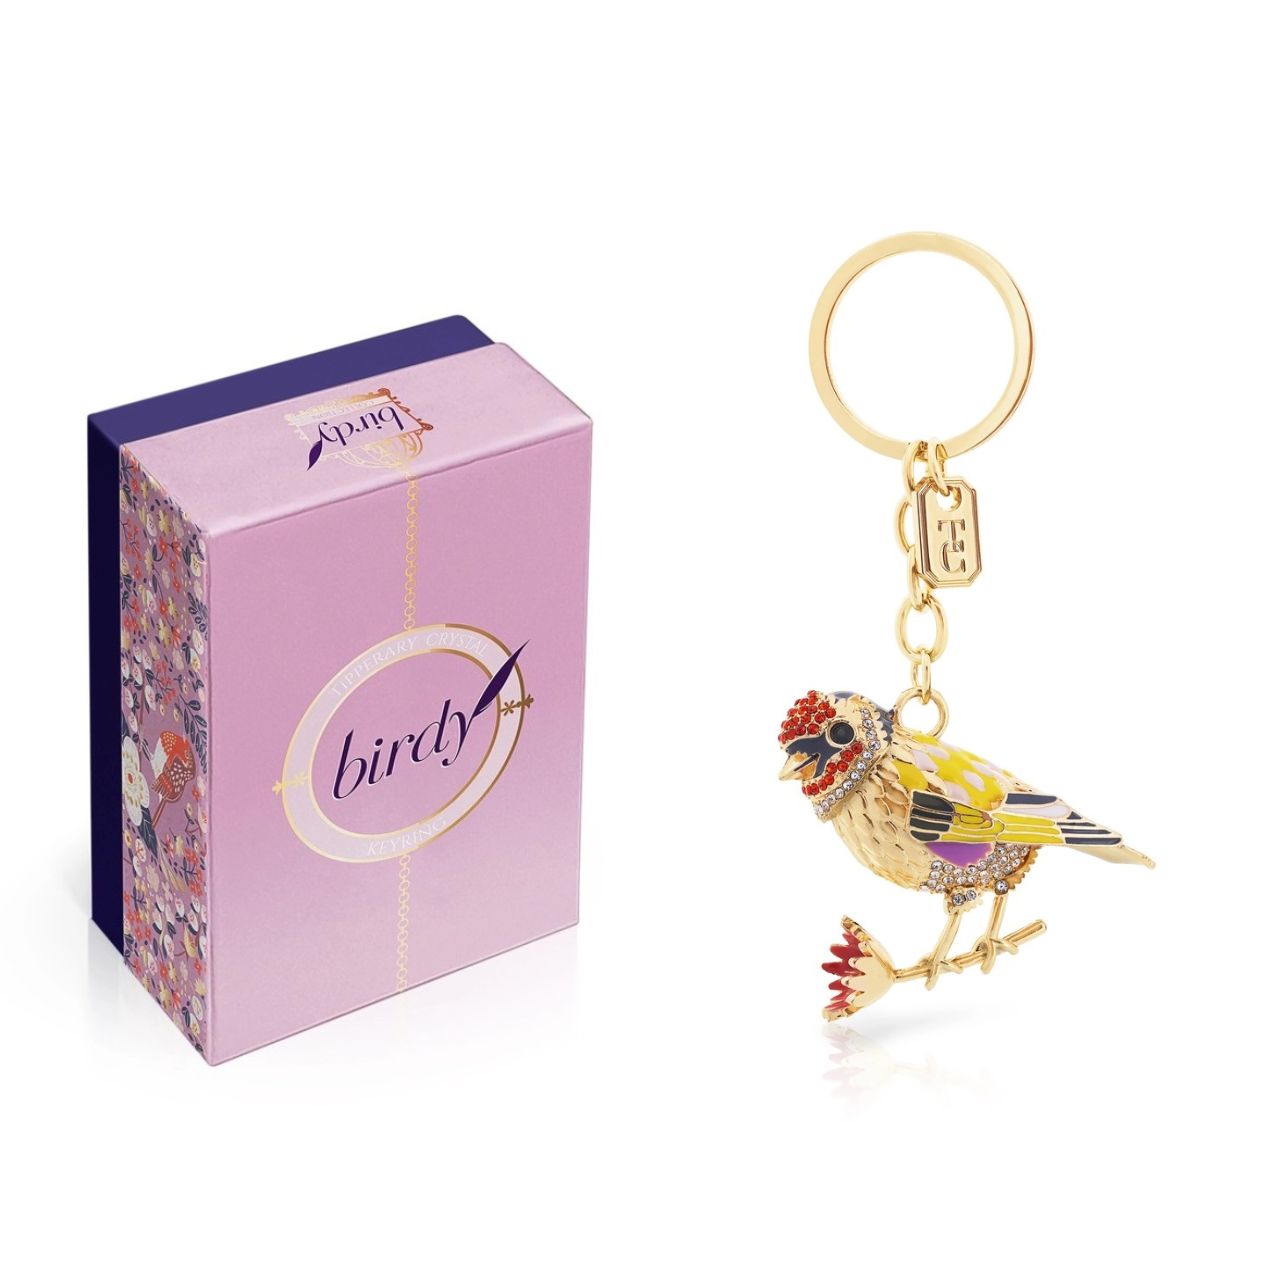 Tipperary Crystal Birdy Keyring - Goldfinch  The Birdy Collection is a series of 6 exclusively commissioned illustrations inspired by native Irish birds; Bullfinch, Goldfinch, Blue tit, Greenfinch, Kingfisher and Robin.